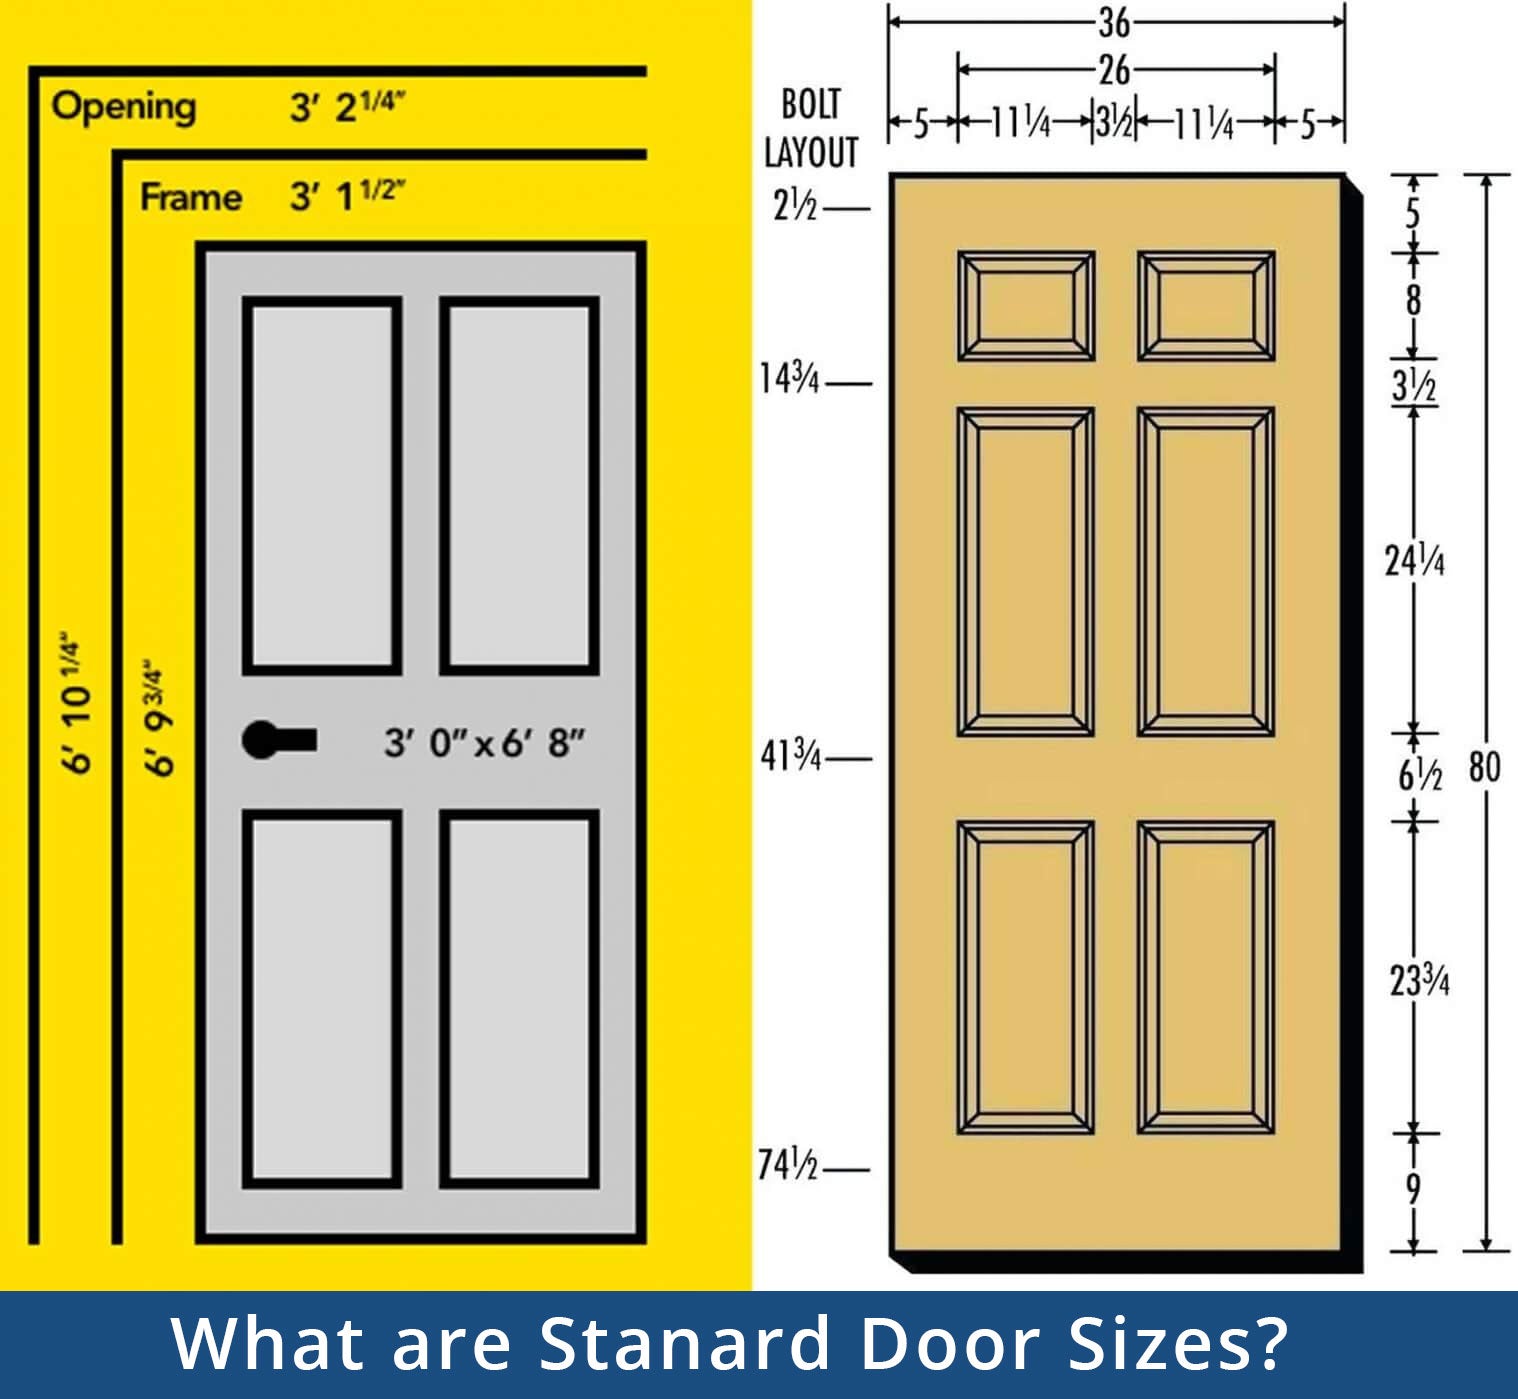 What Do You Need to Know About the Standard Door Sizes?